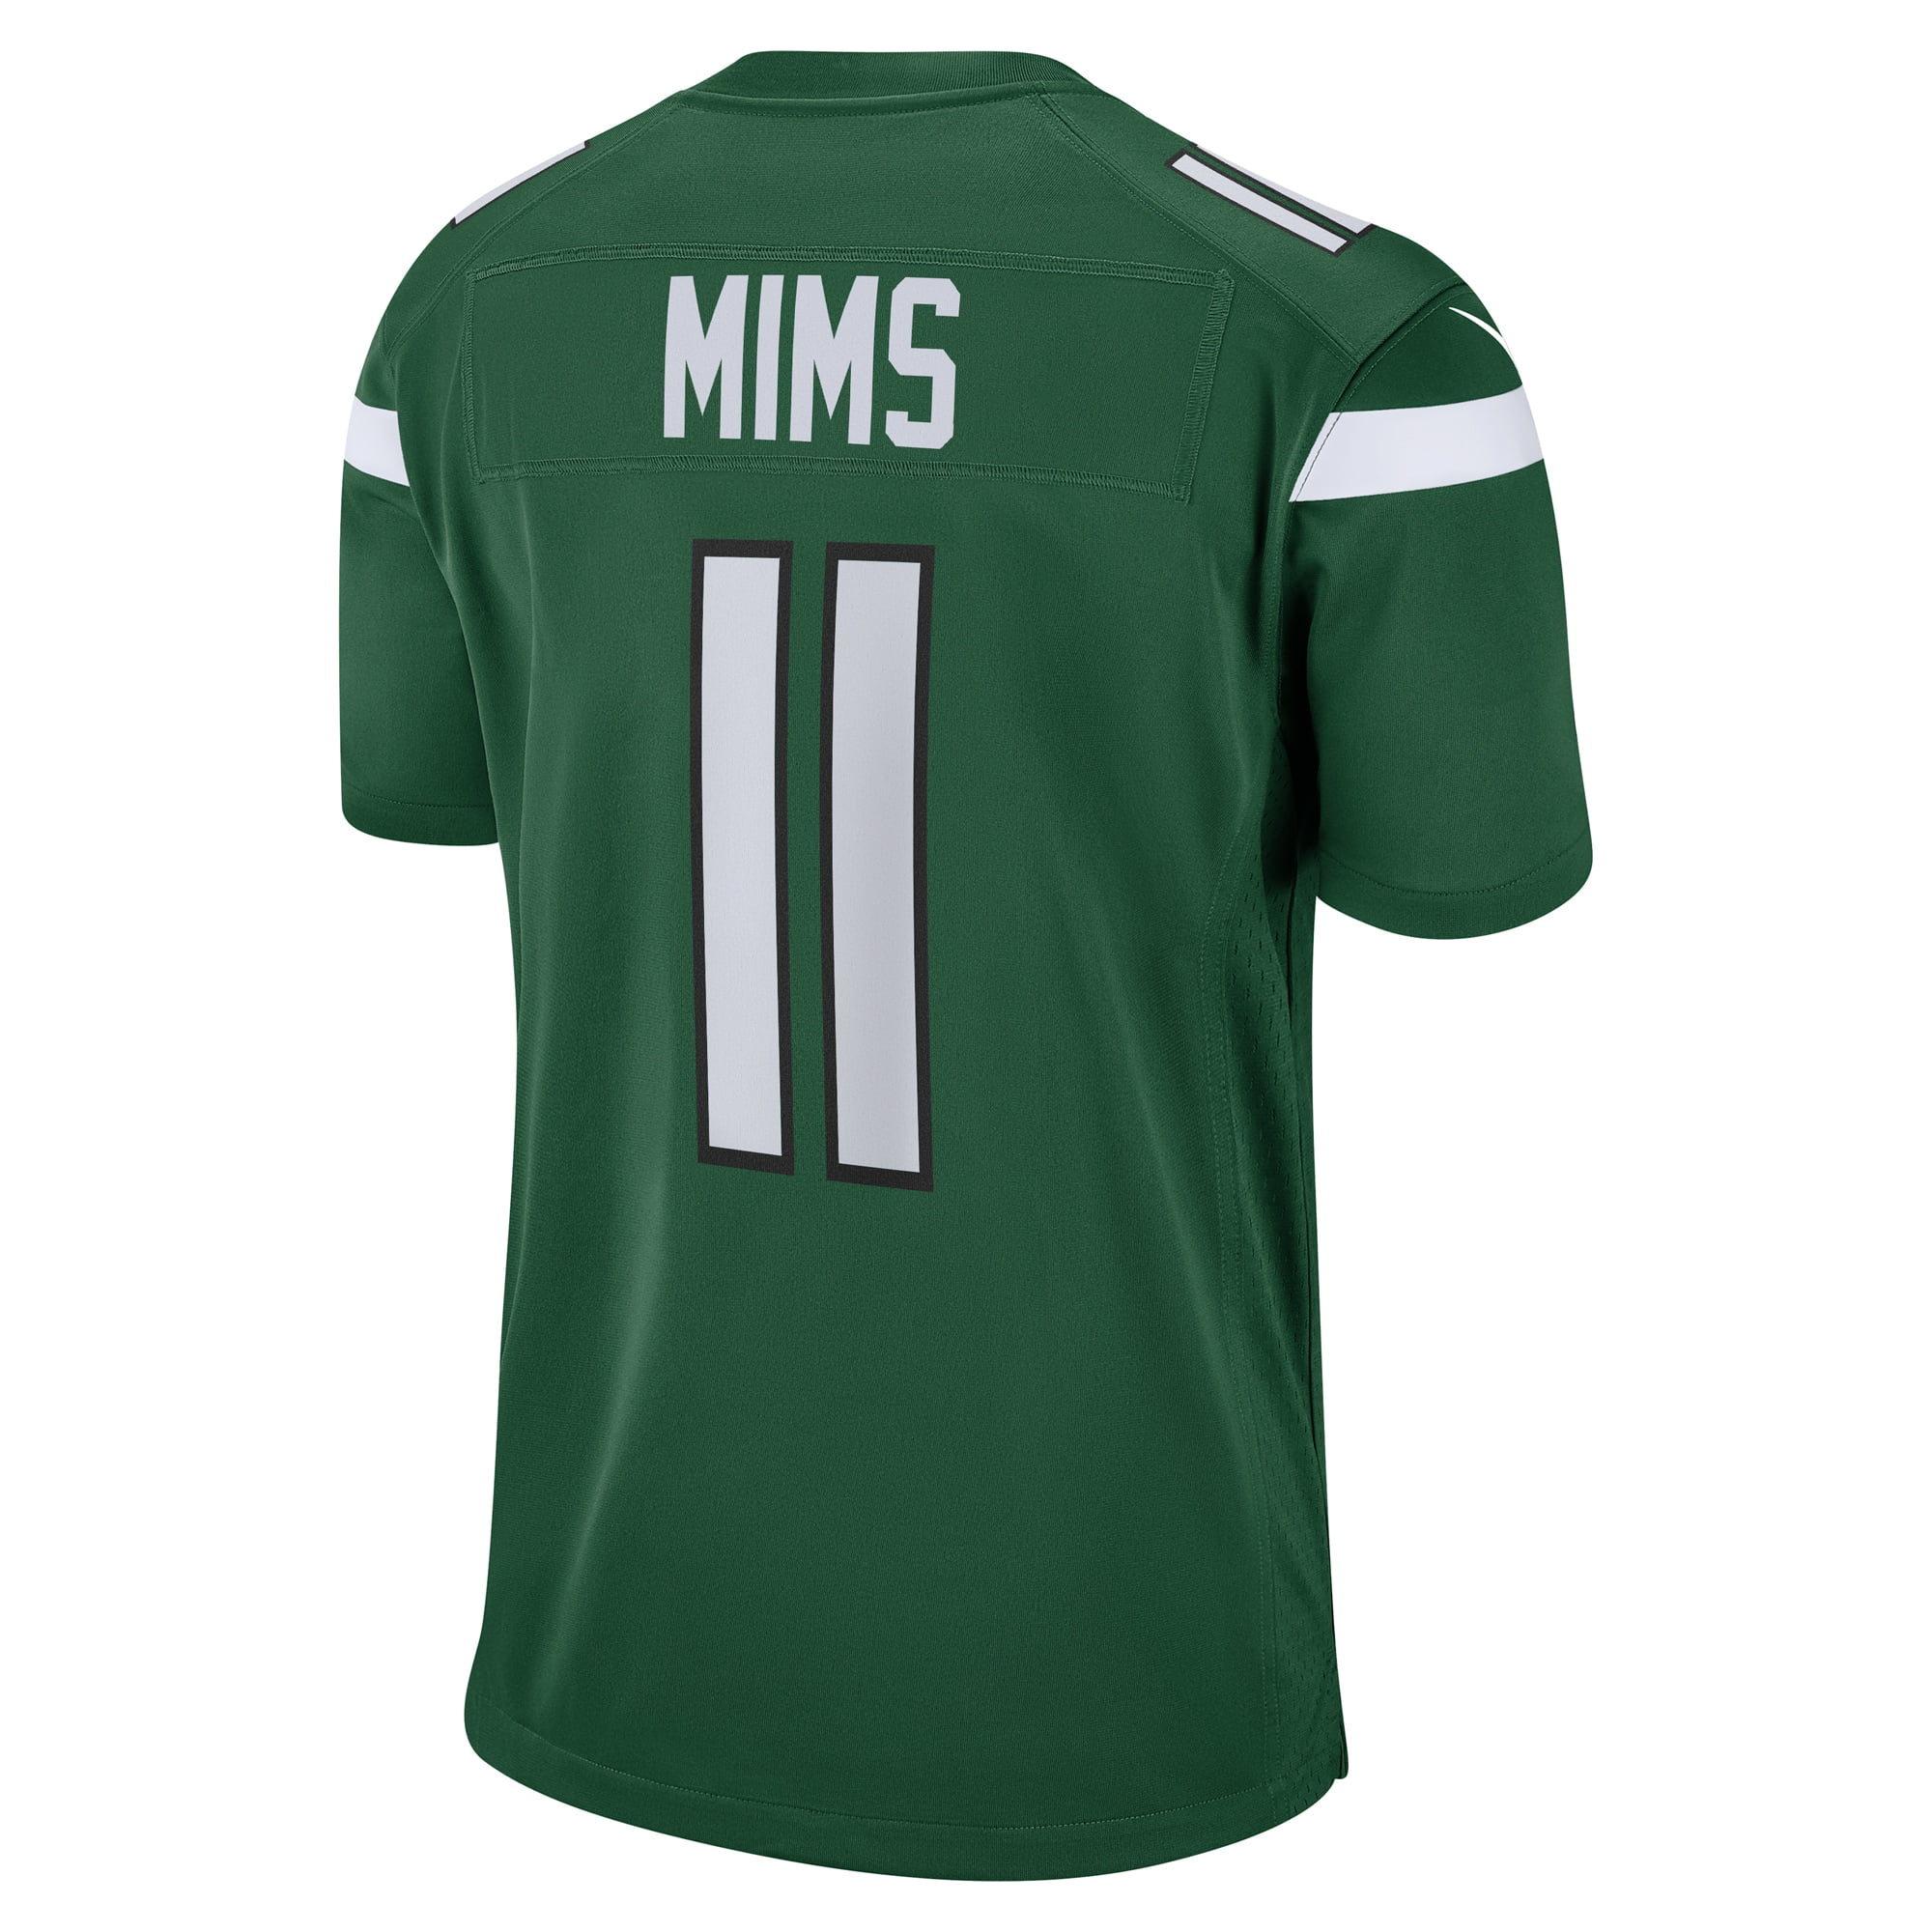 mims jets jersey